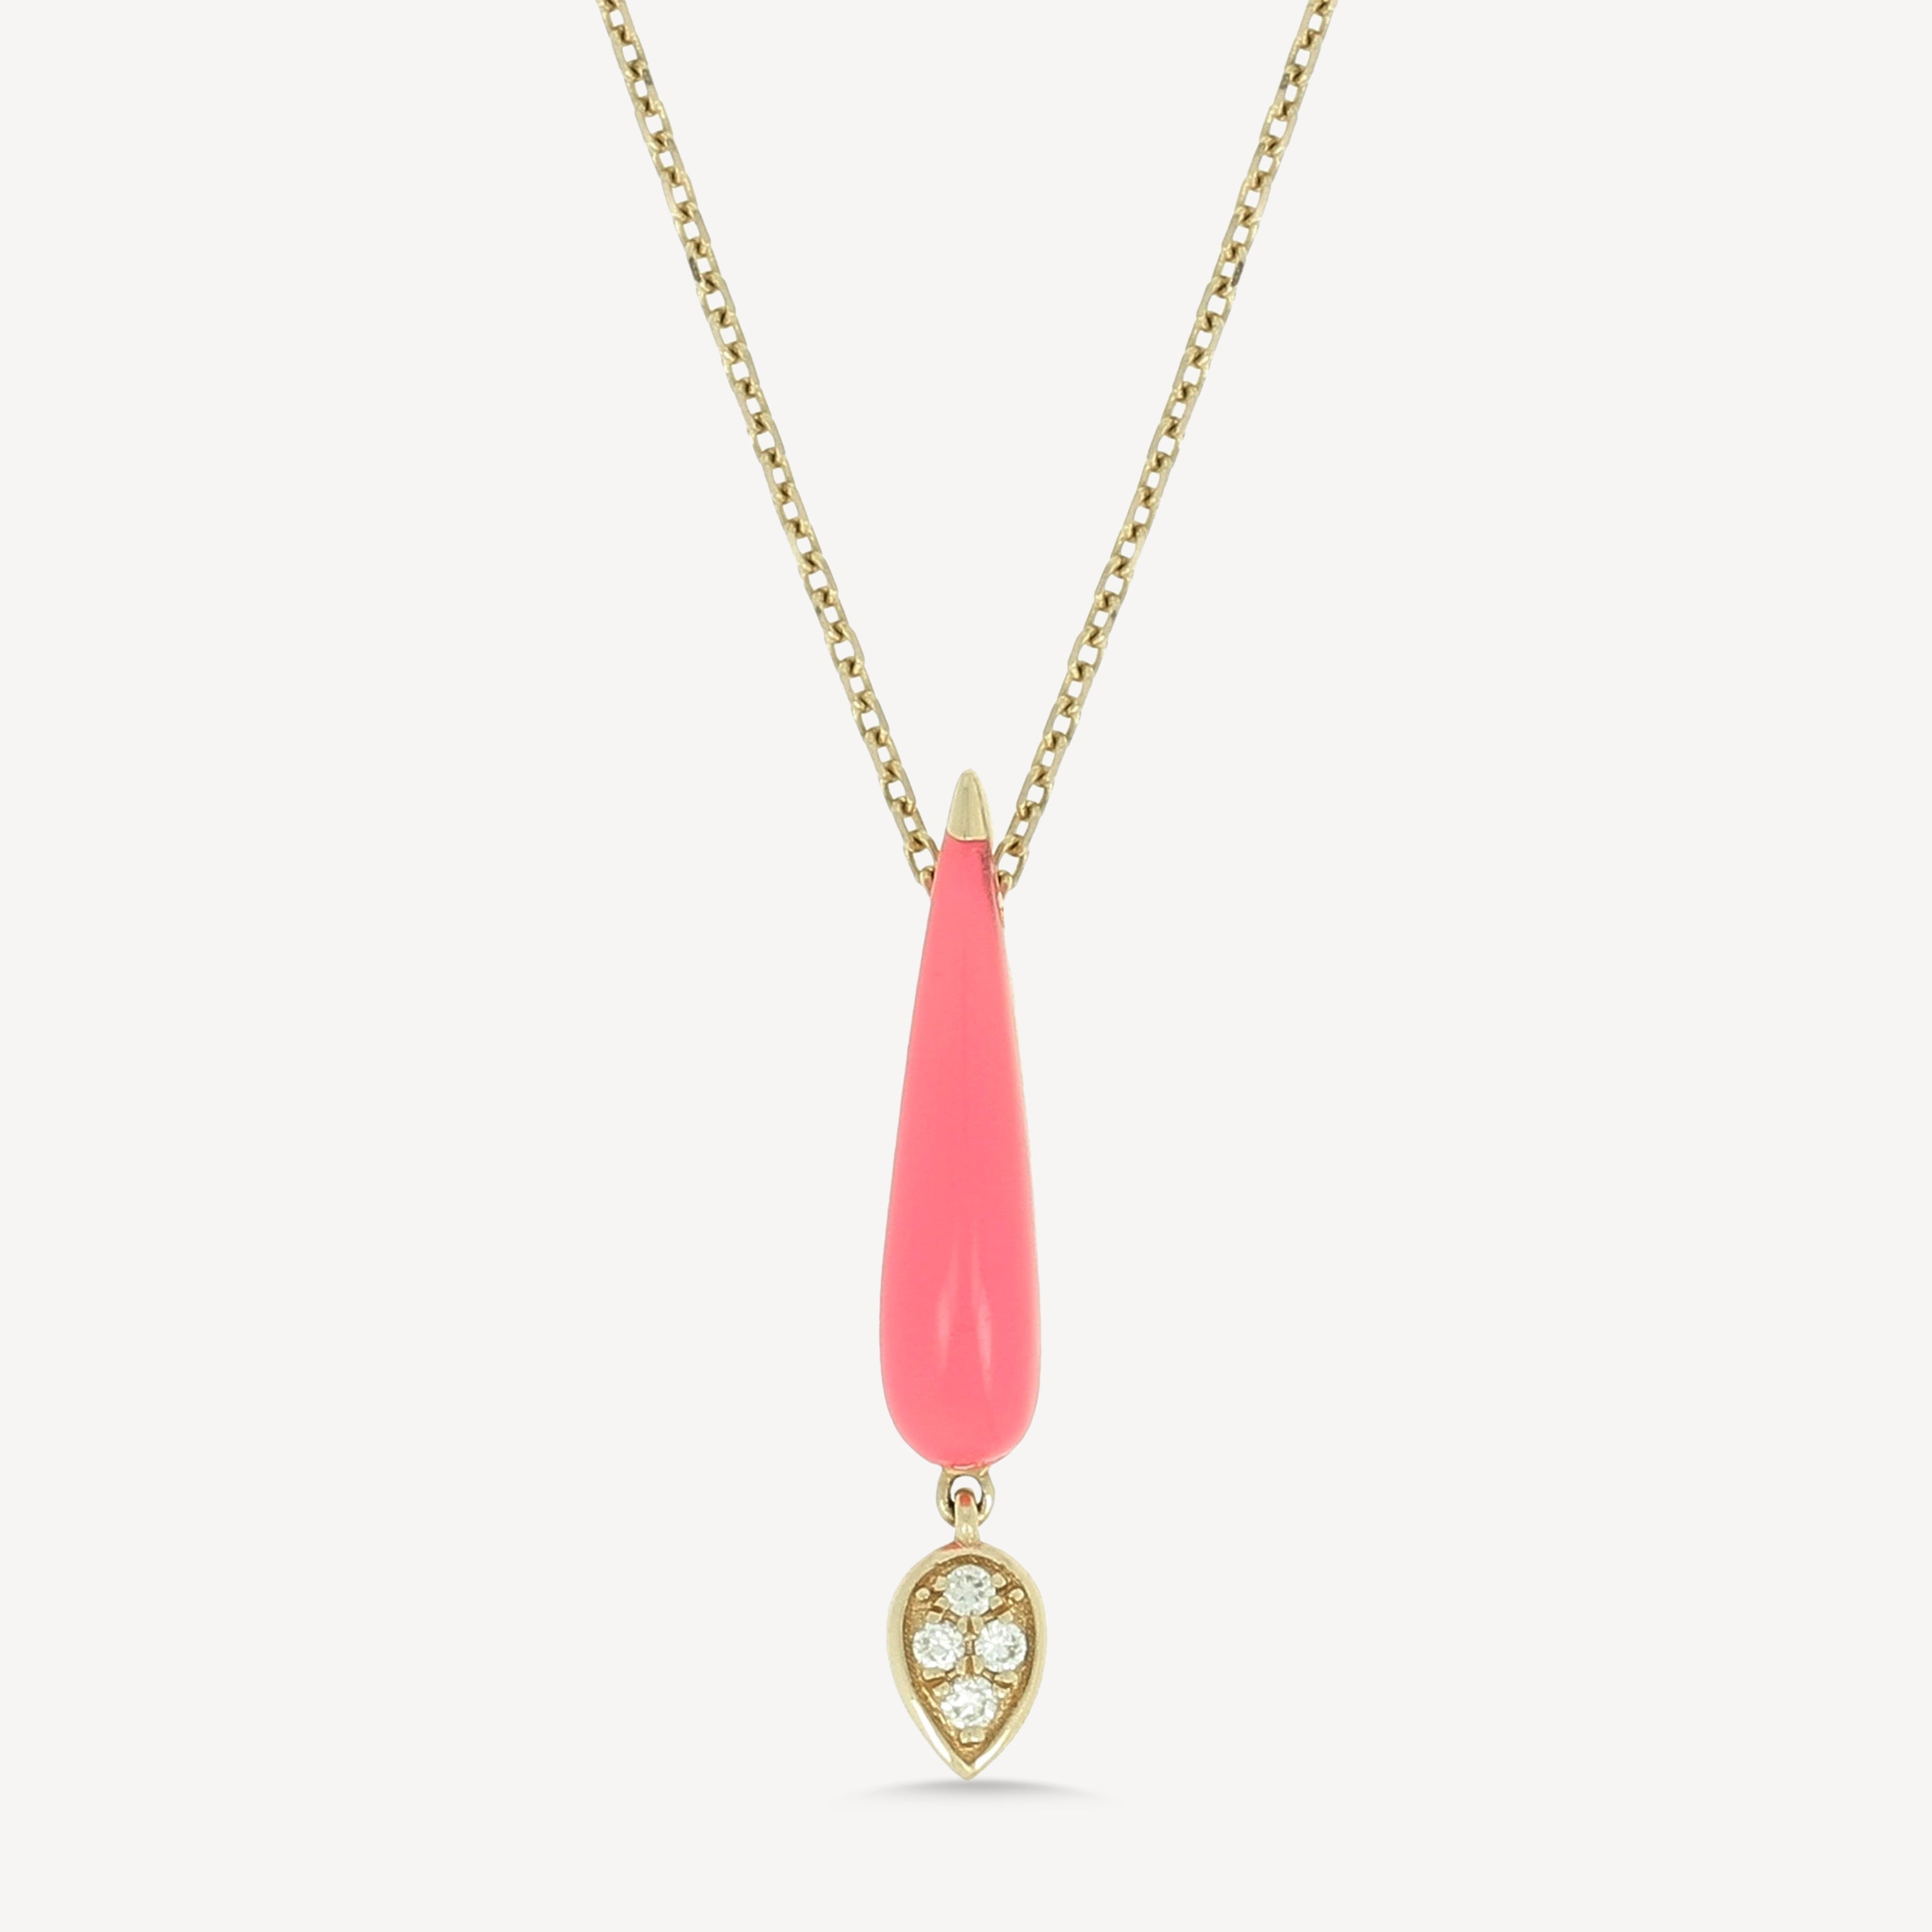 Mini Drop Necklace in Neon Pink